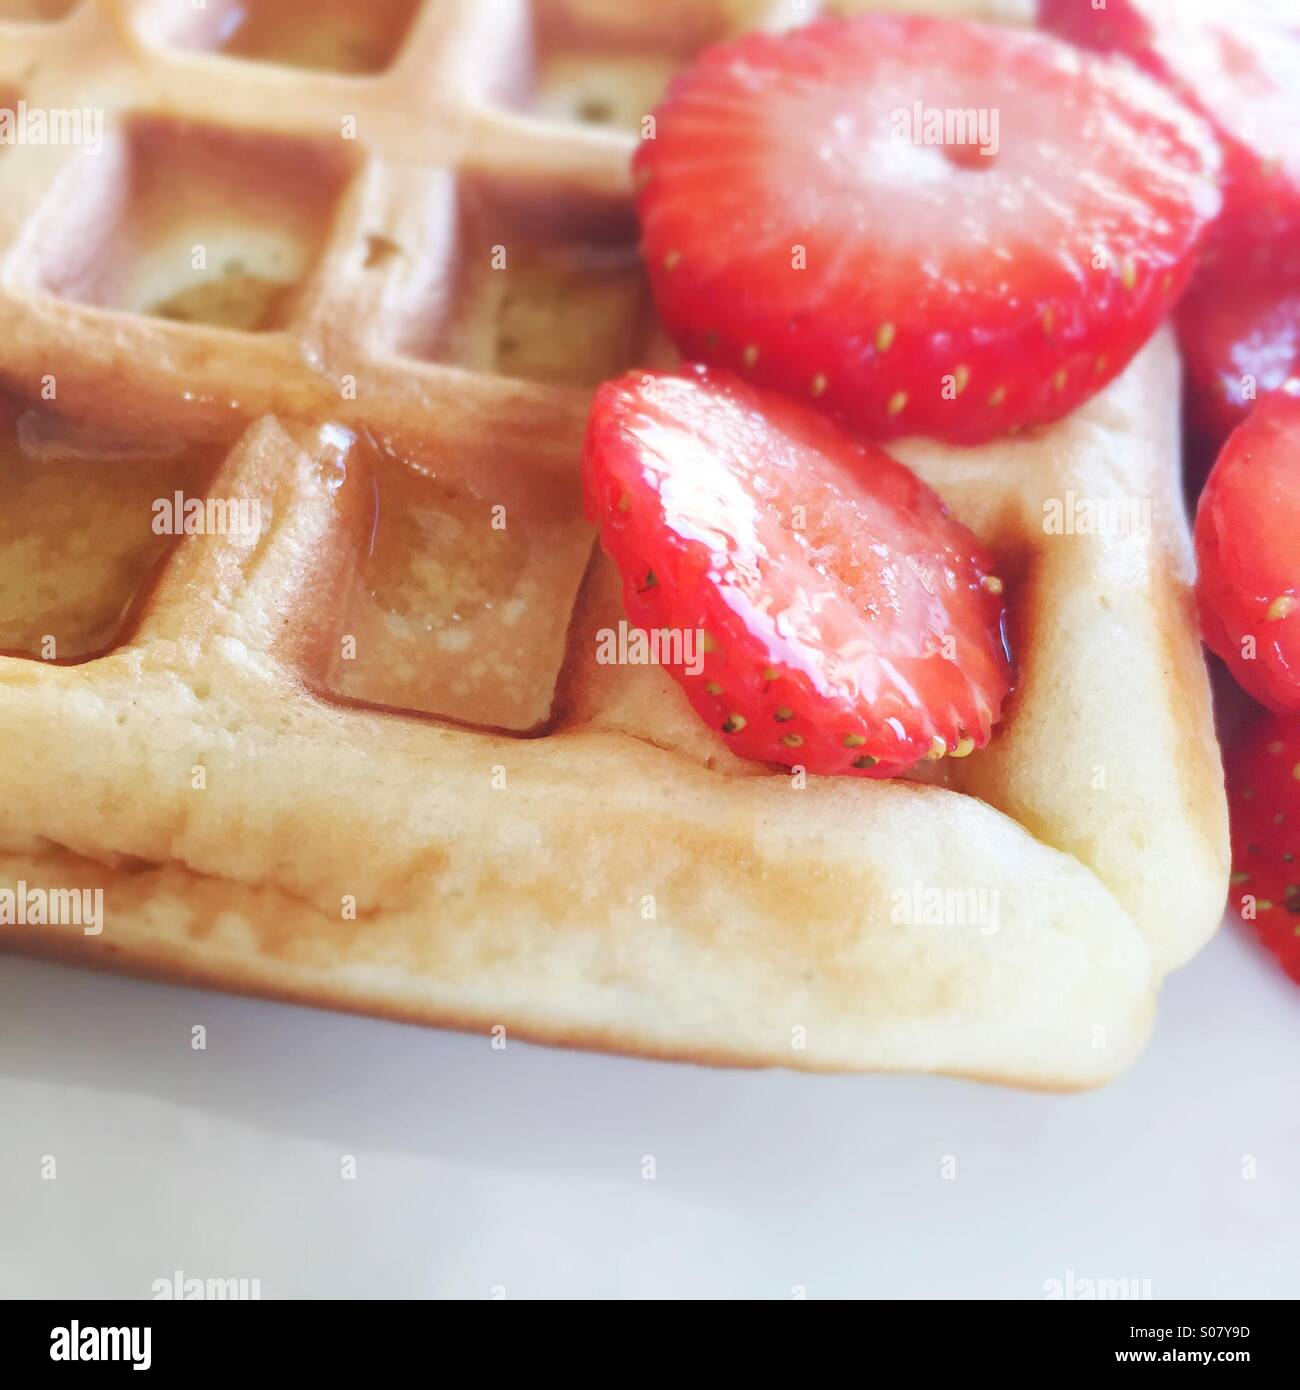 Waffles and strawberries Stock Photo